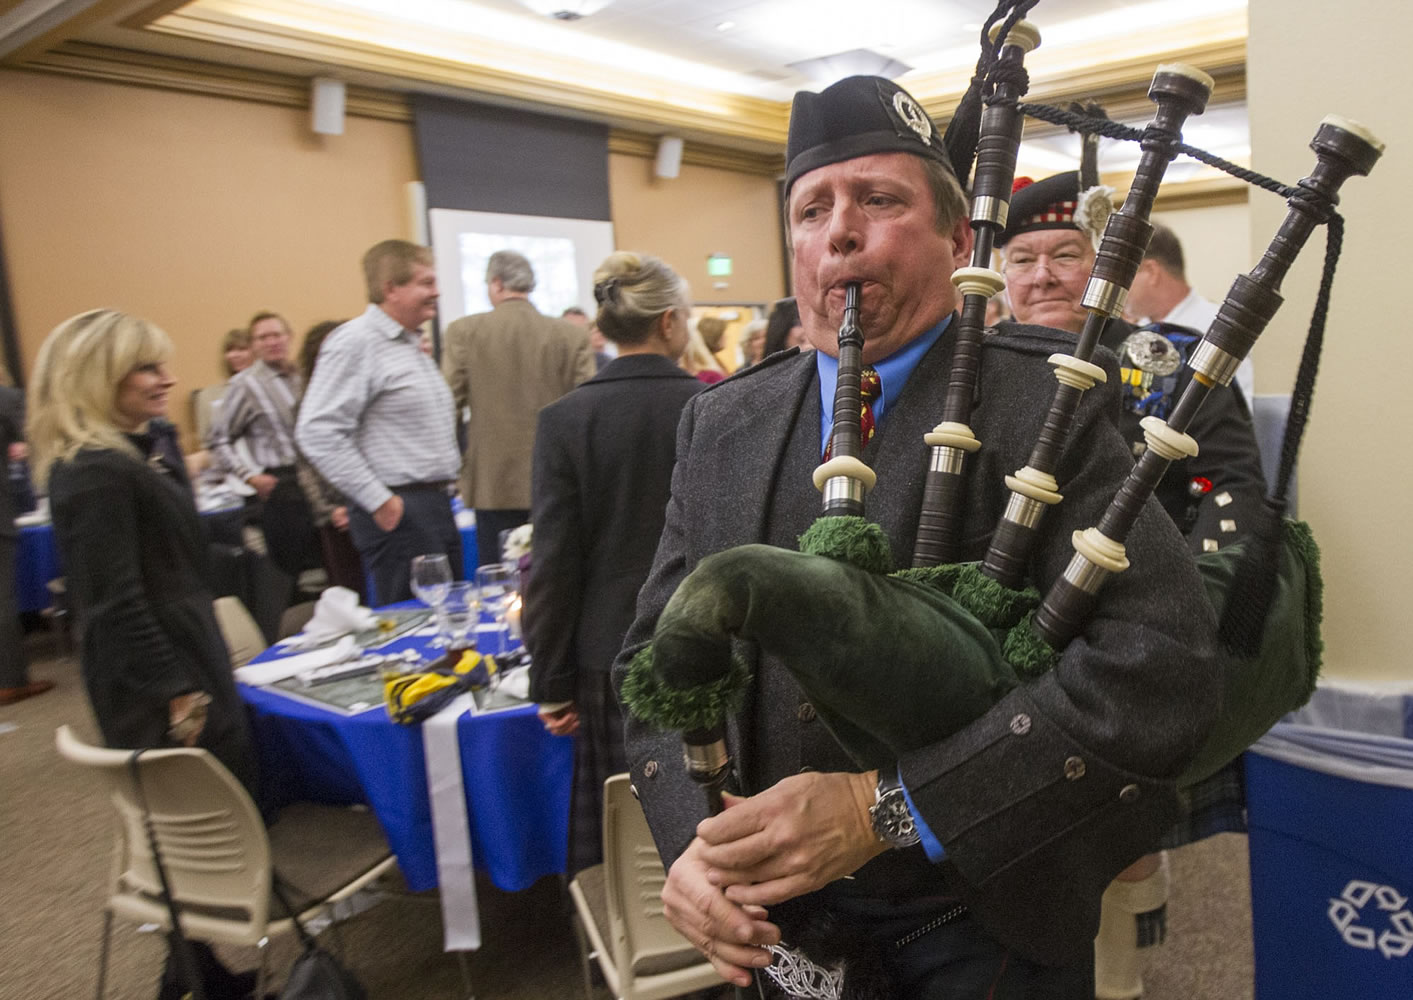 Timothy Gunn plays bagpipes to welcome in the haggis at the inaugural Robert Burns Dinner at Clark College.